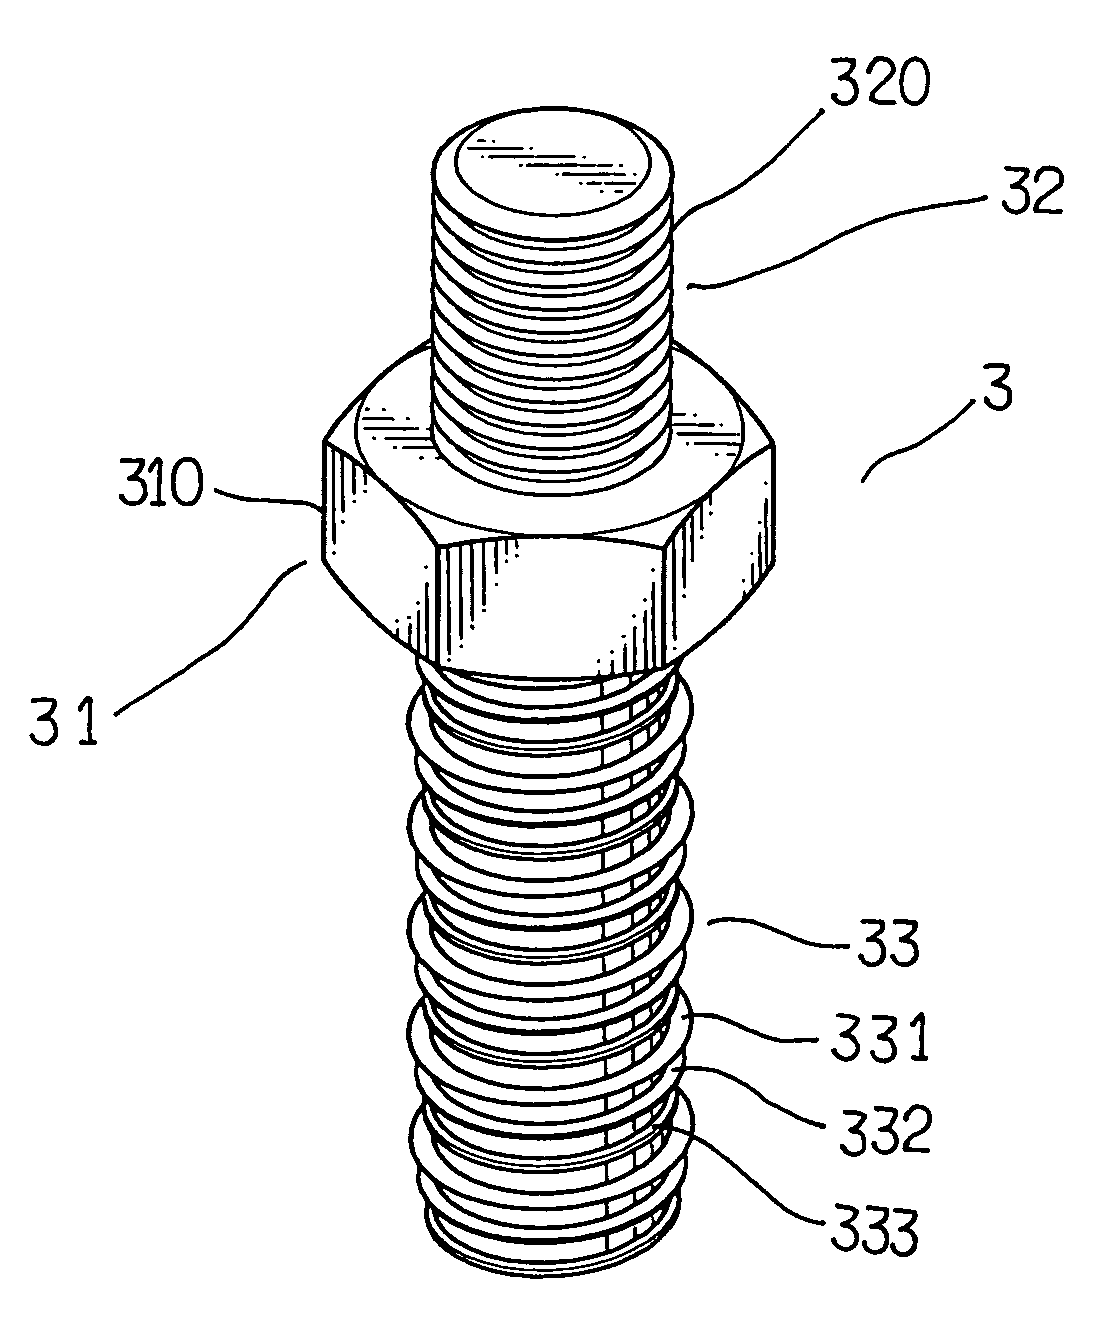 Anchoring screw with double heads and triple threads of different depths of thread